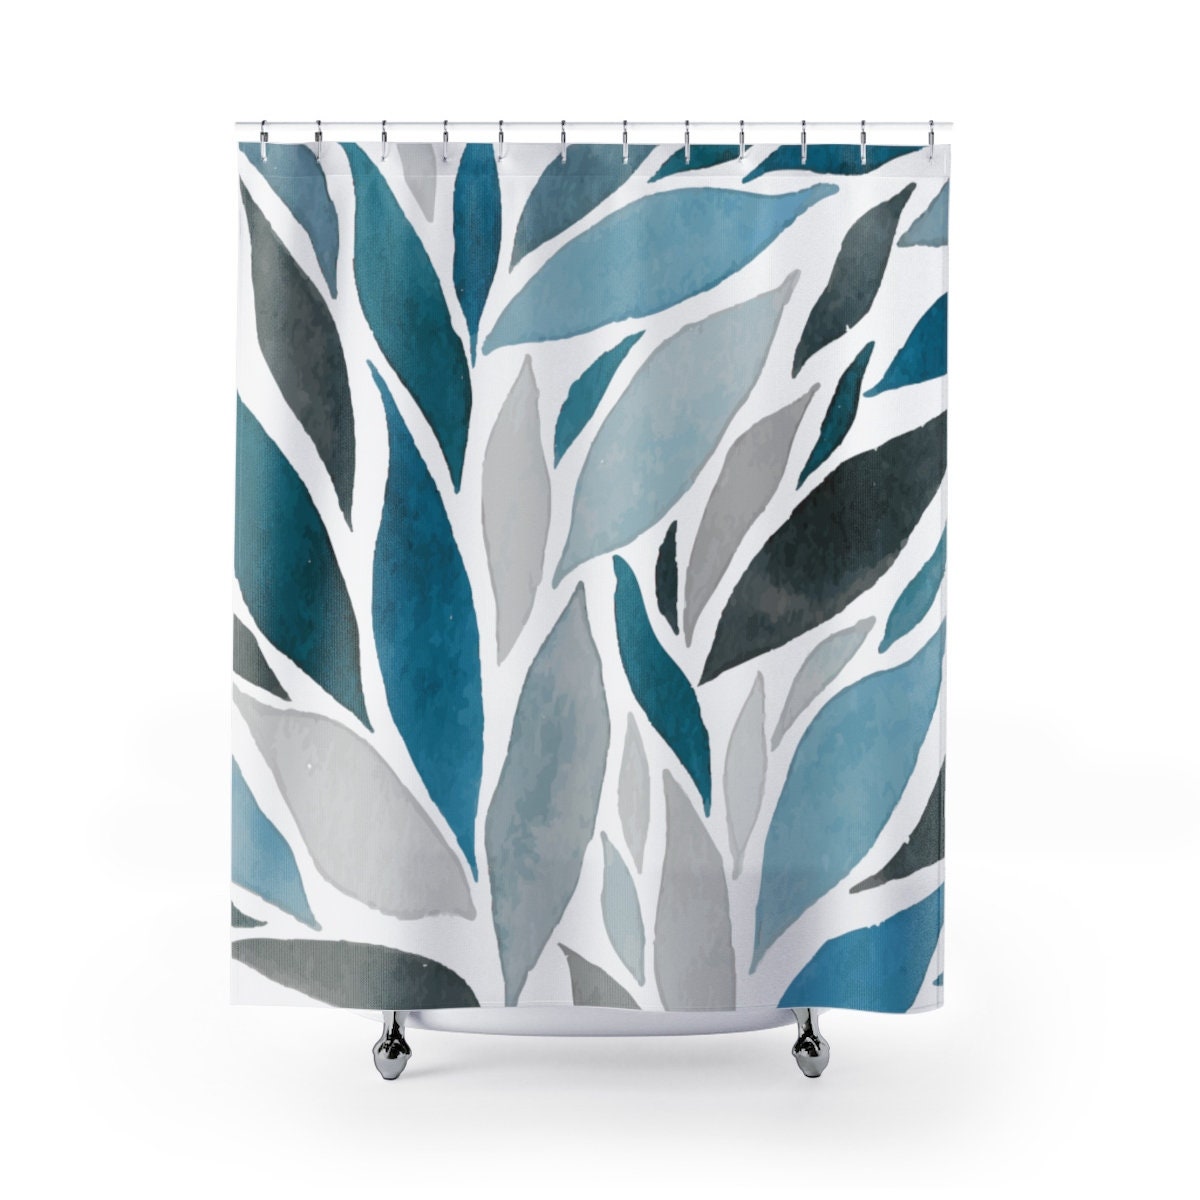 Shower Curtain  Brand New Beautiful Designs Blue And Grey Leaves 